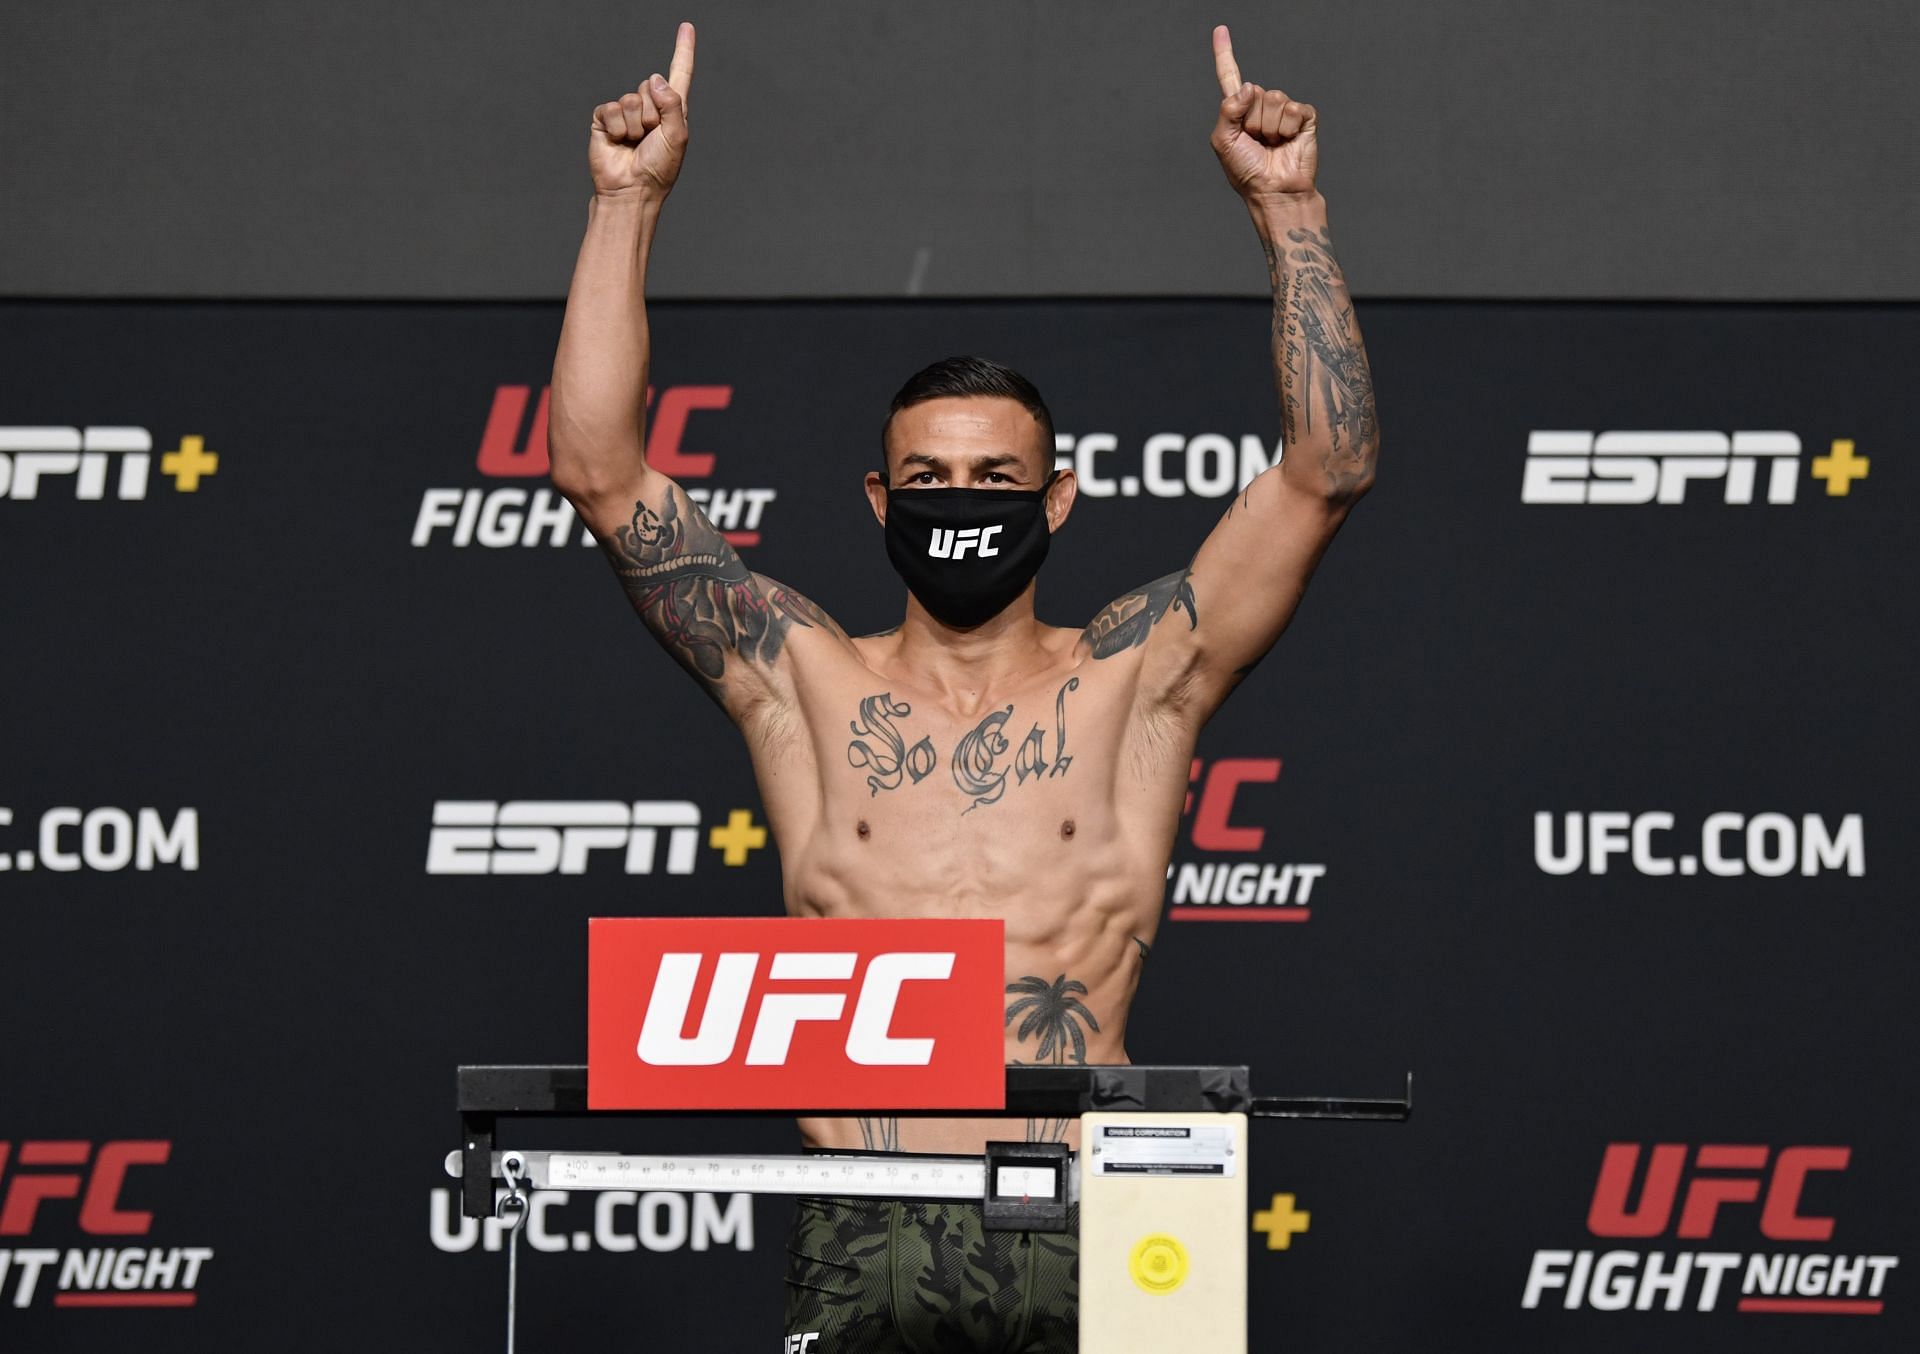 kig ind indendørs Jakke UFC News: Cub Swanson equals Jose Aldo and Max Holloway's record for most  featherweight wins